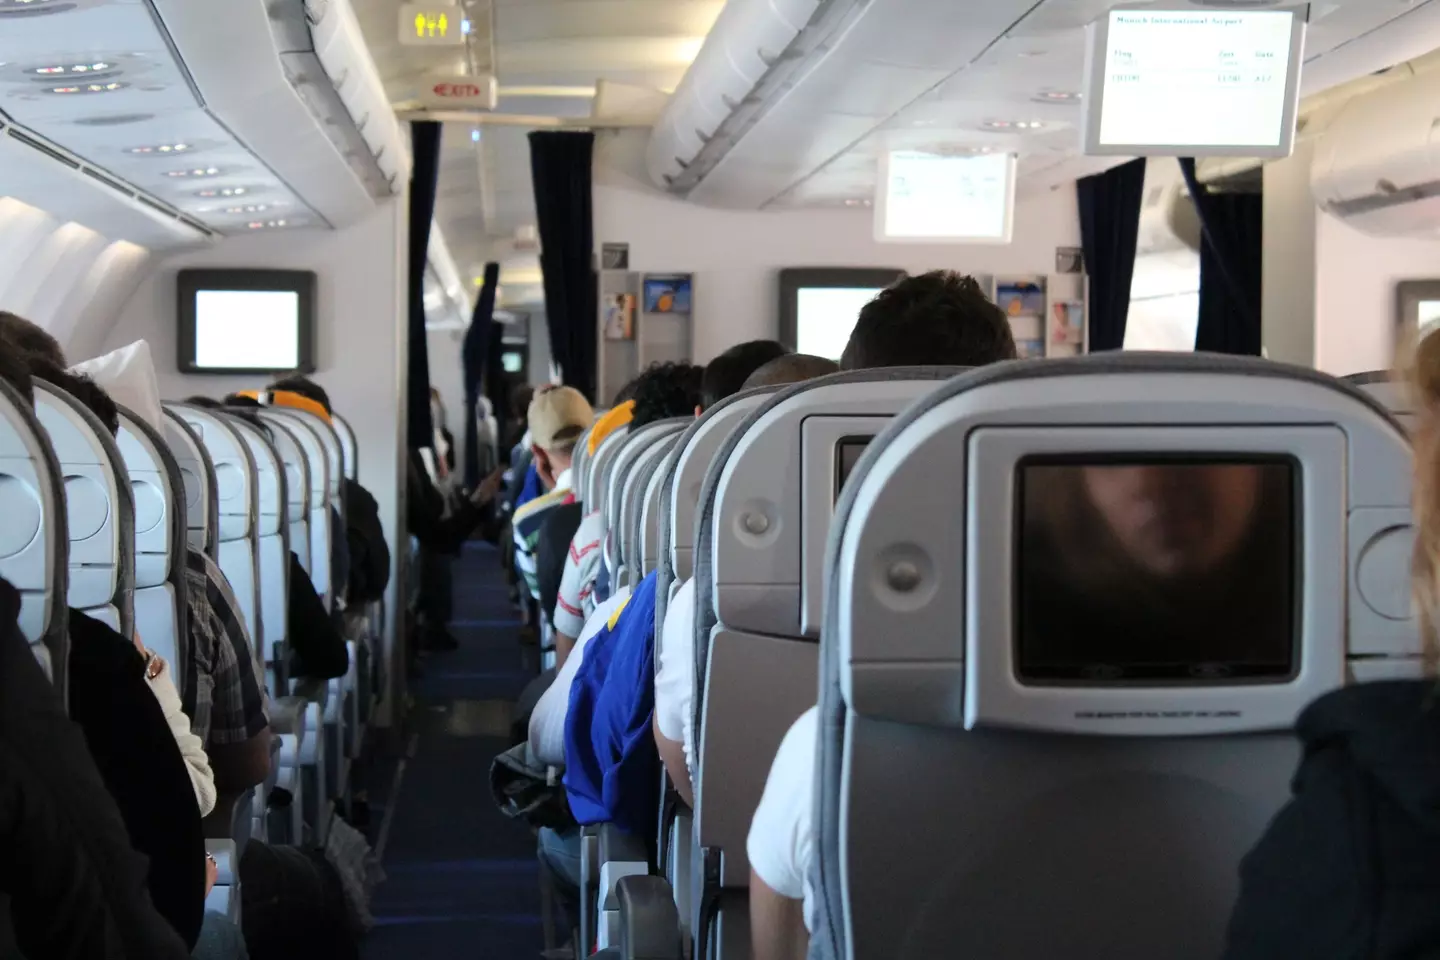 A former flight attendant has revealed some secrets behind working in the air.